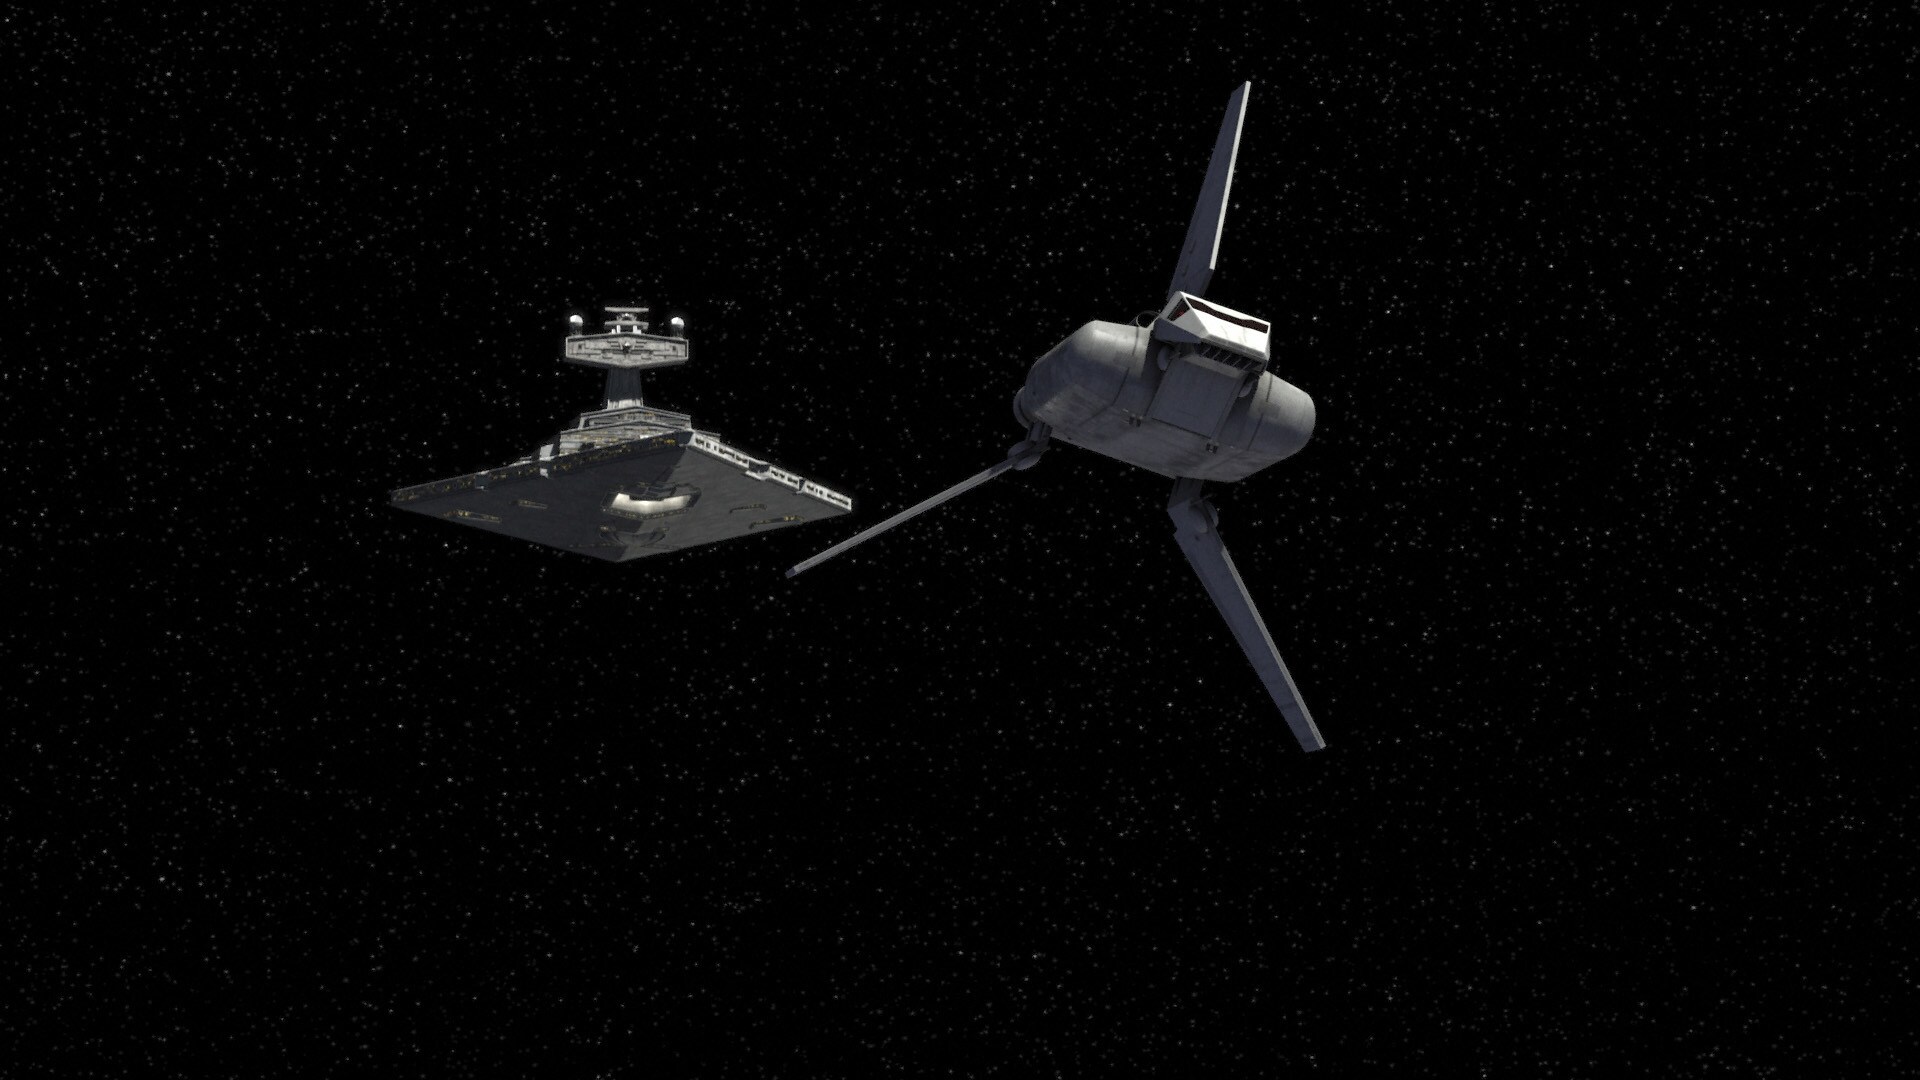 This marks the first appearance of the Sentinel-class shuttle in the series. The vessel was desig...